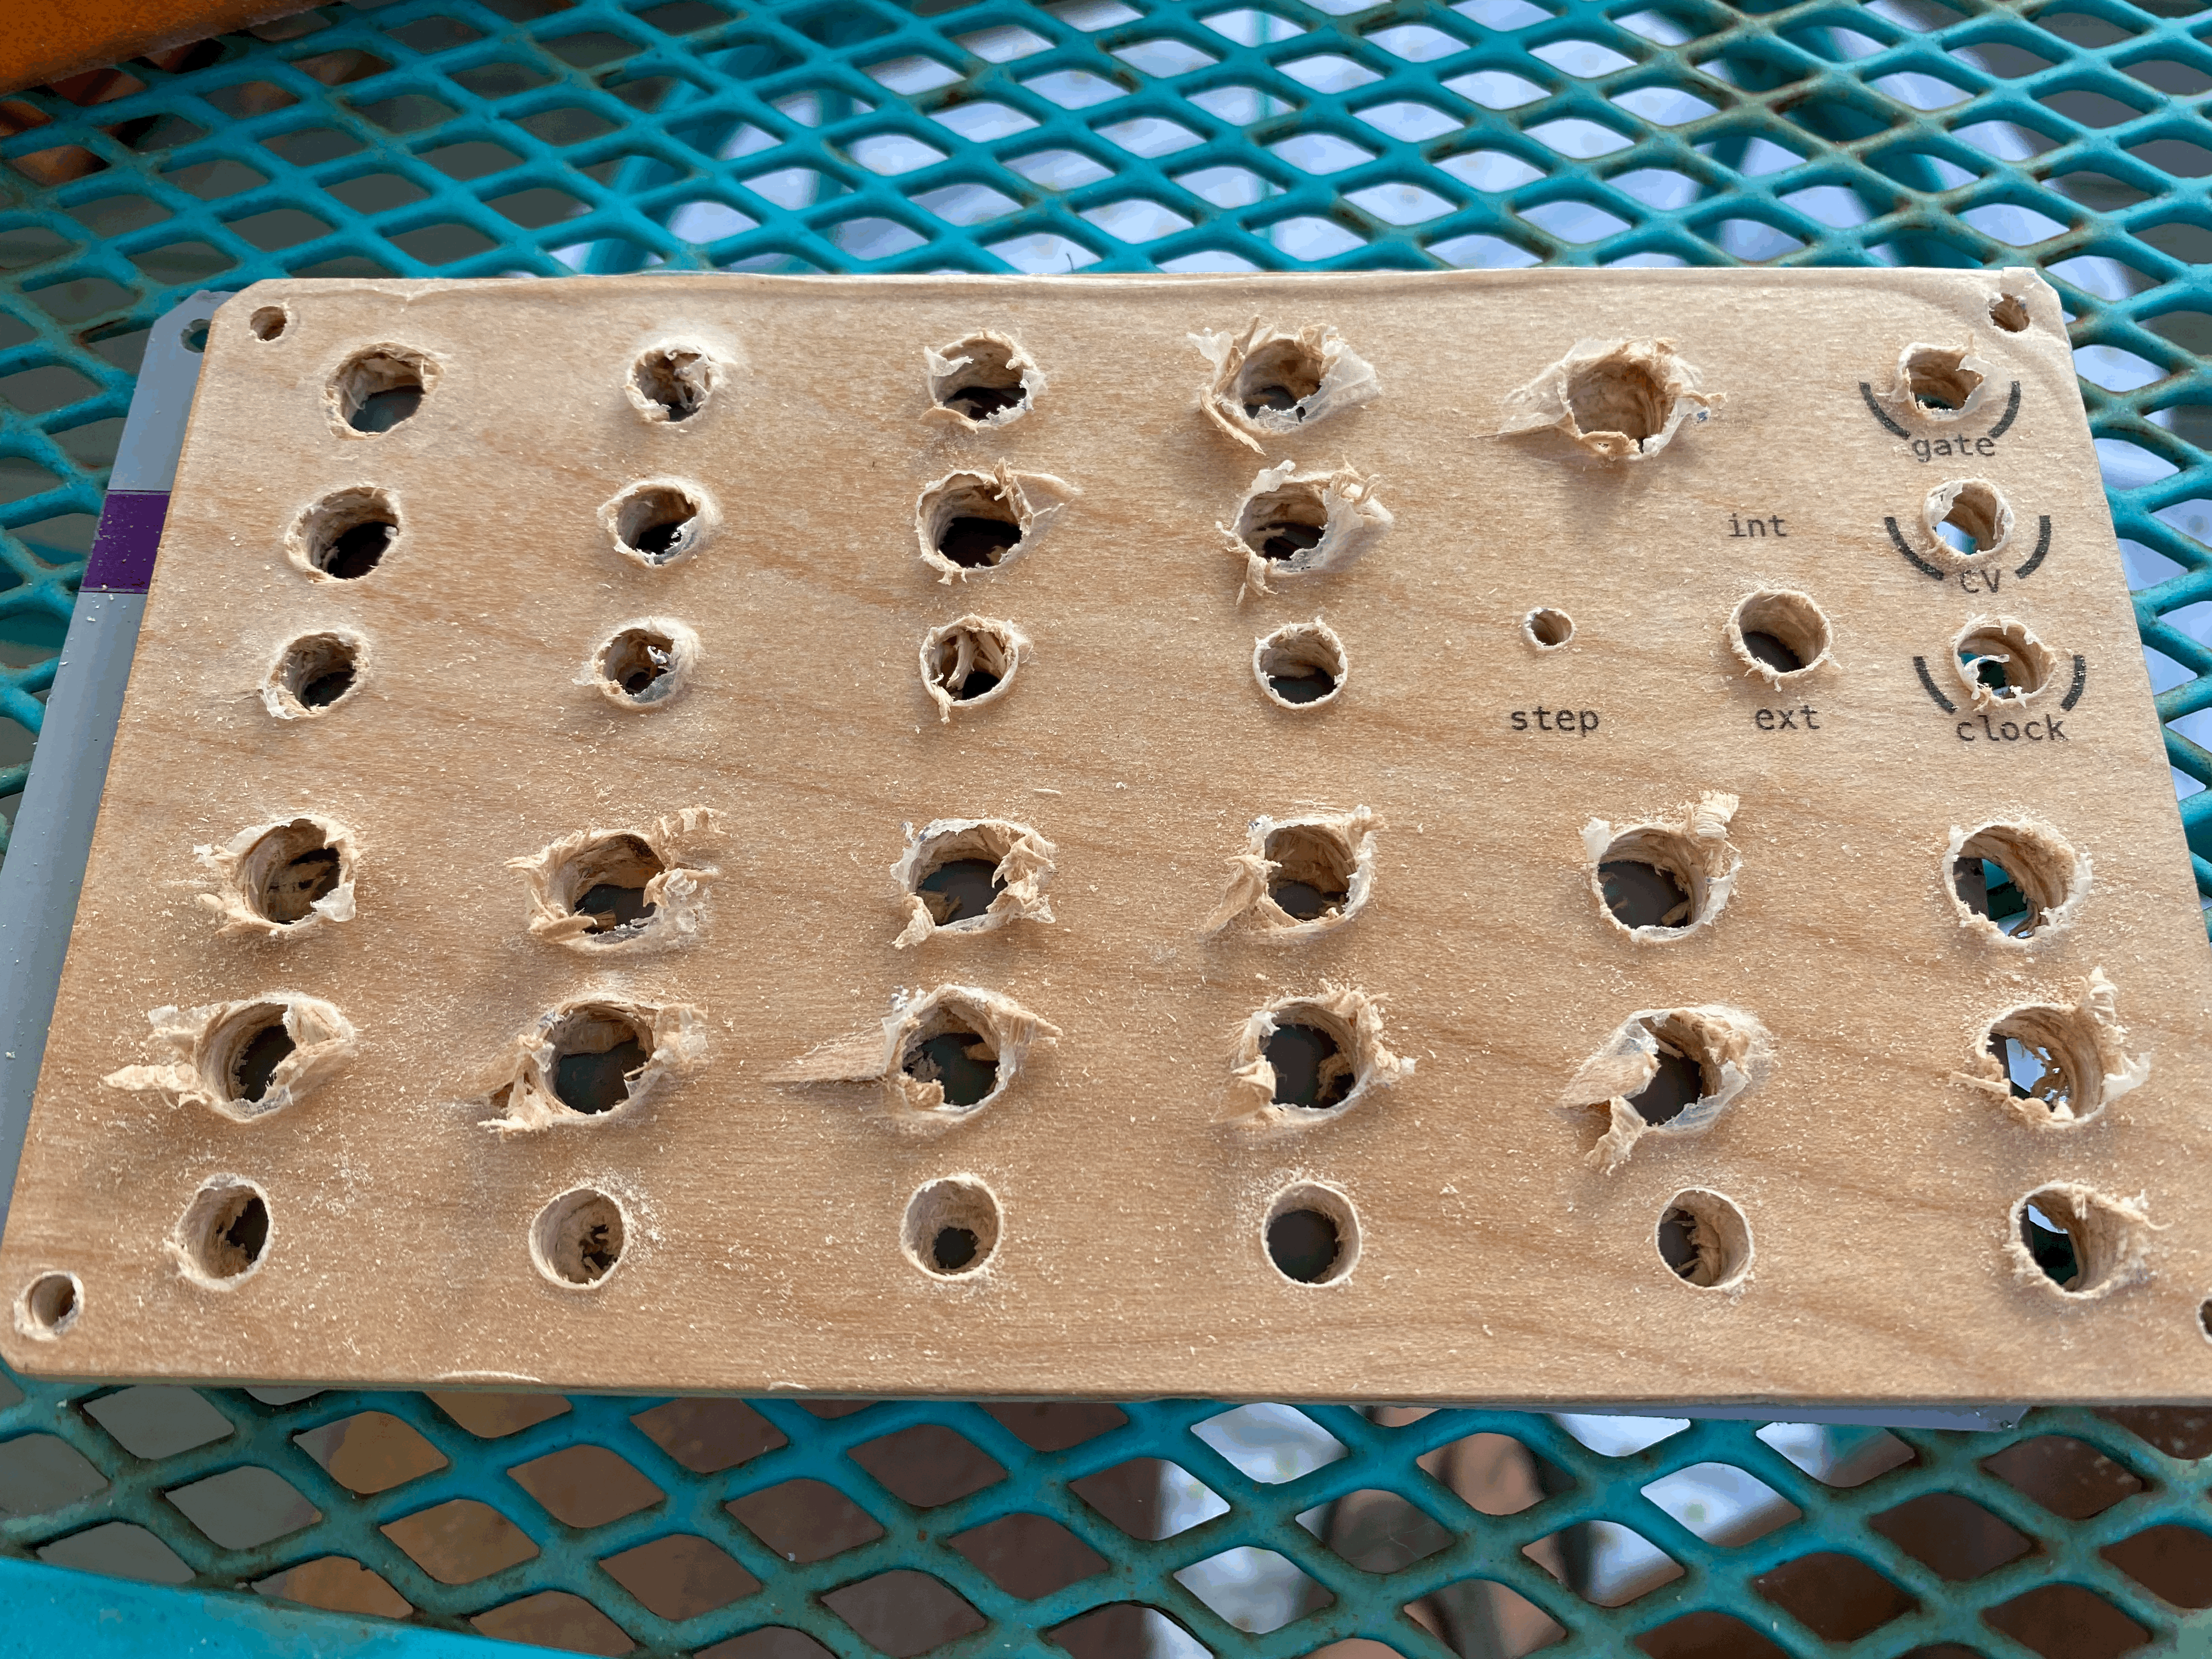 Wooden synthesizer panel with tears in component holes